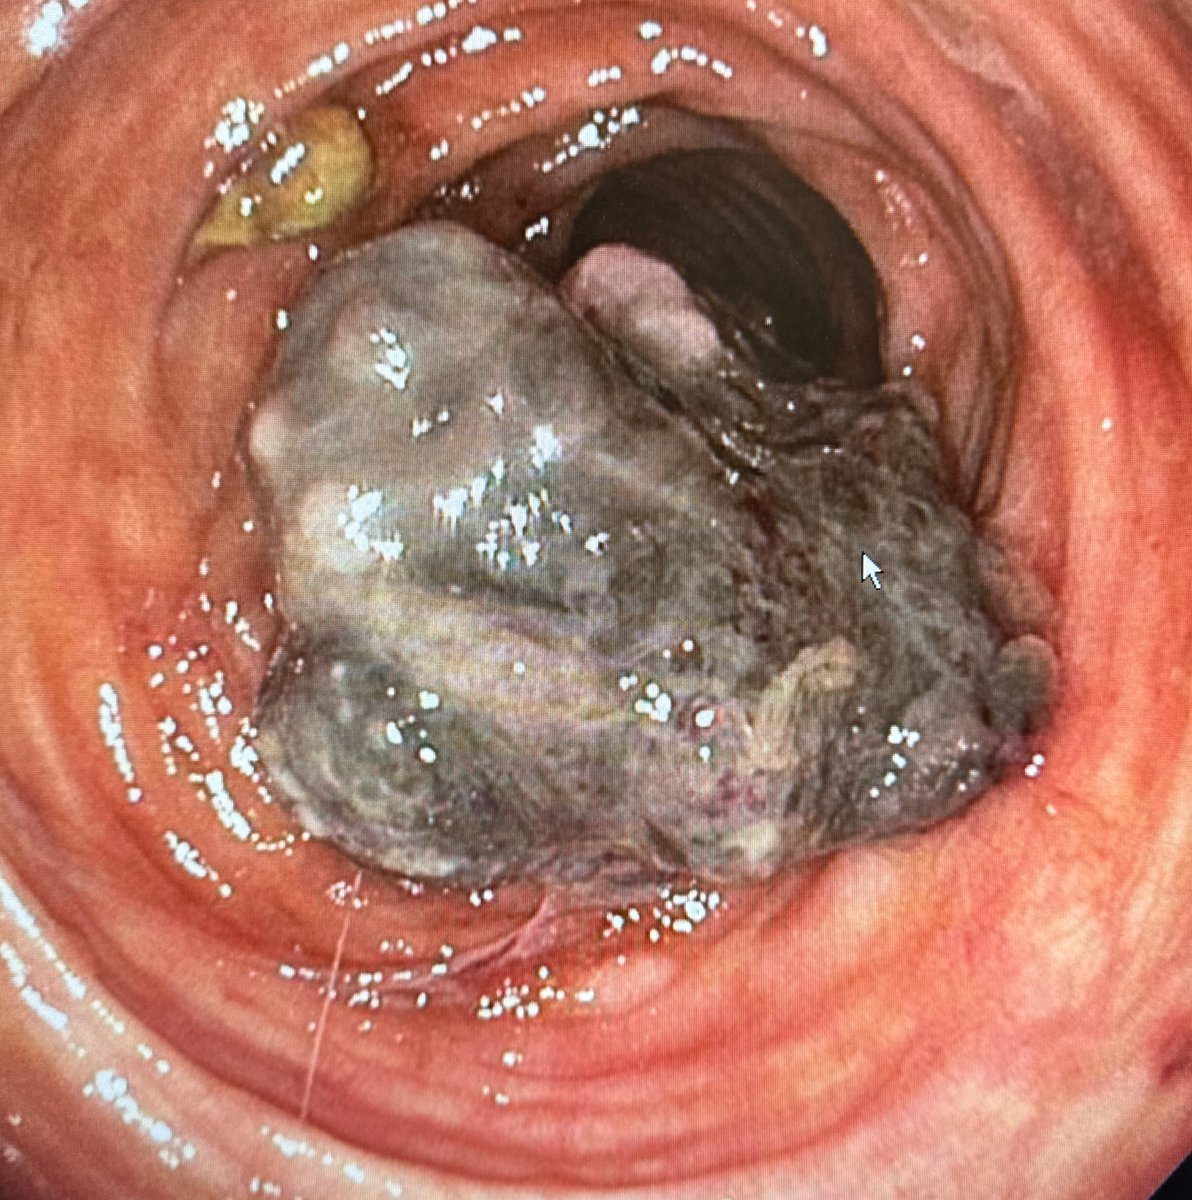 Patient with EGD/ Colon today. Interesting findings.